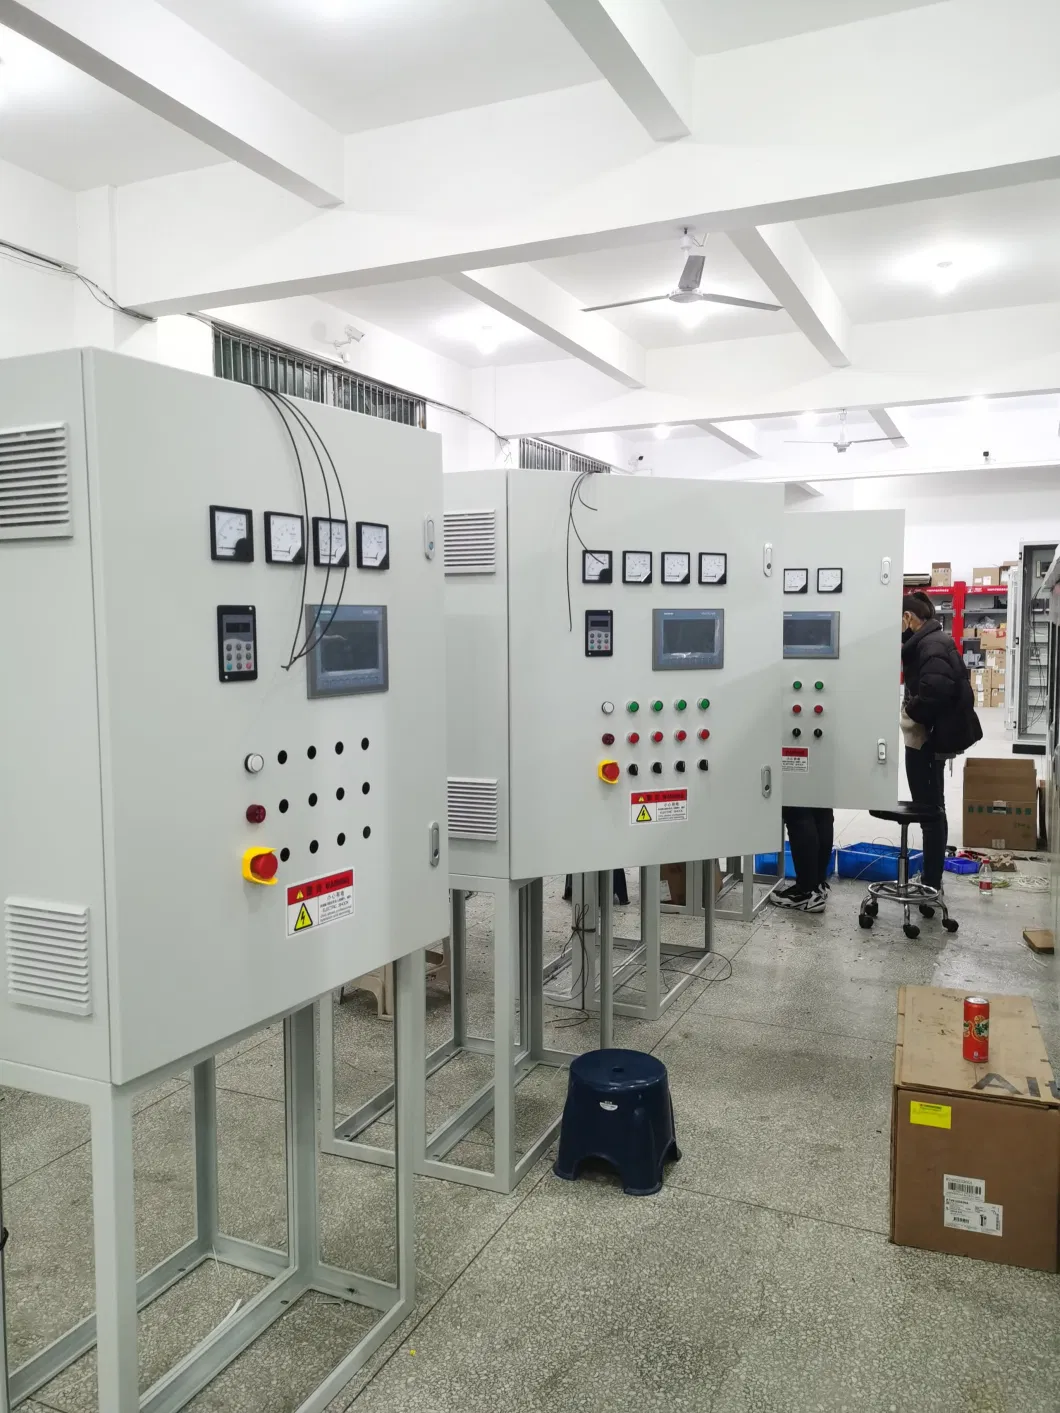 Q17 Low Voltage Industrial Pump Electrical Control Panel Board